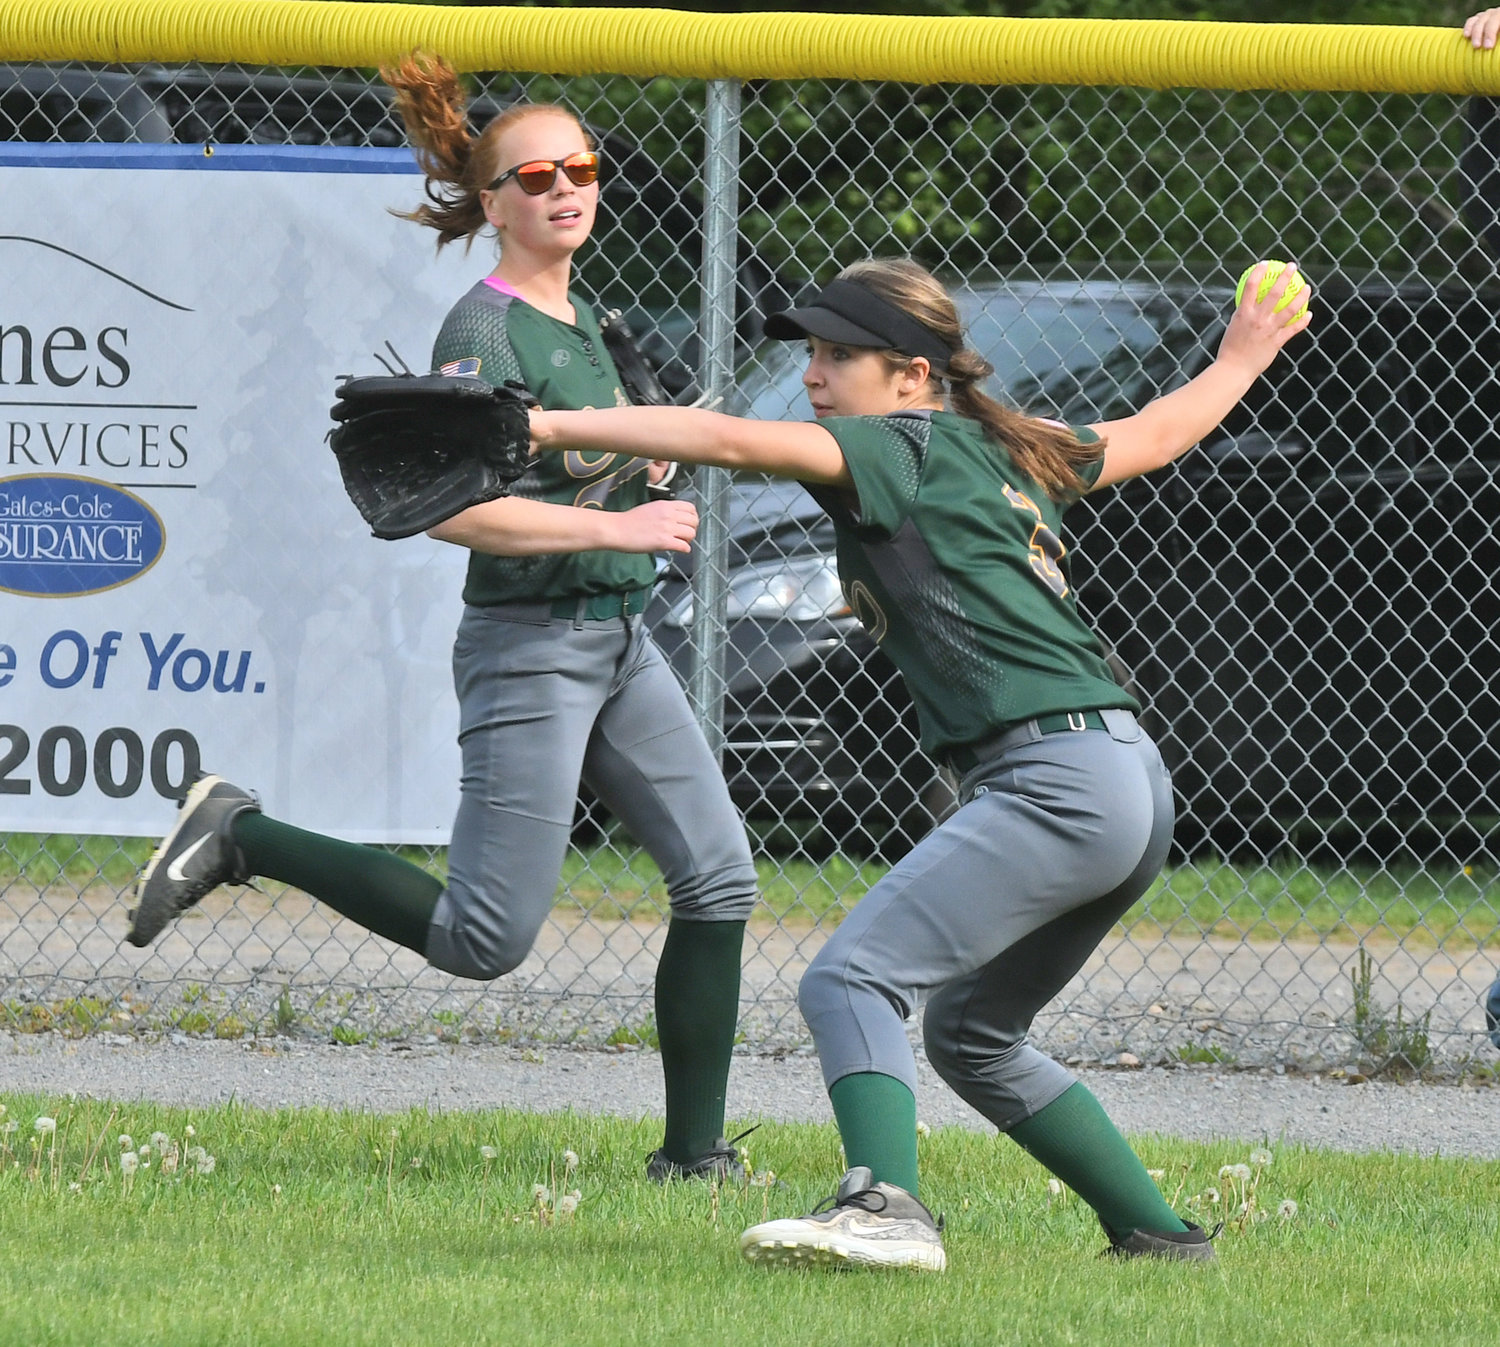 Adirondack's Mariah Depan fires the ball in from the outfield after a Utica Notre Dame hit Monday. Kaitlin Gallo backs her up on the play. The 16th seed Wildcats were hosting the 17th seeded Jugglers in the first round of the Section III Class C playoffs. The visitors came away with a 5-1 win.